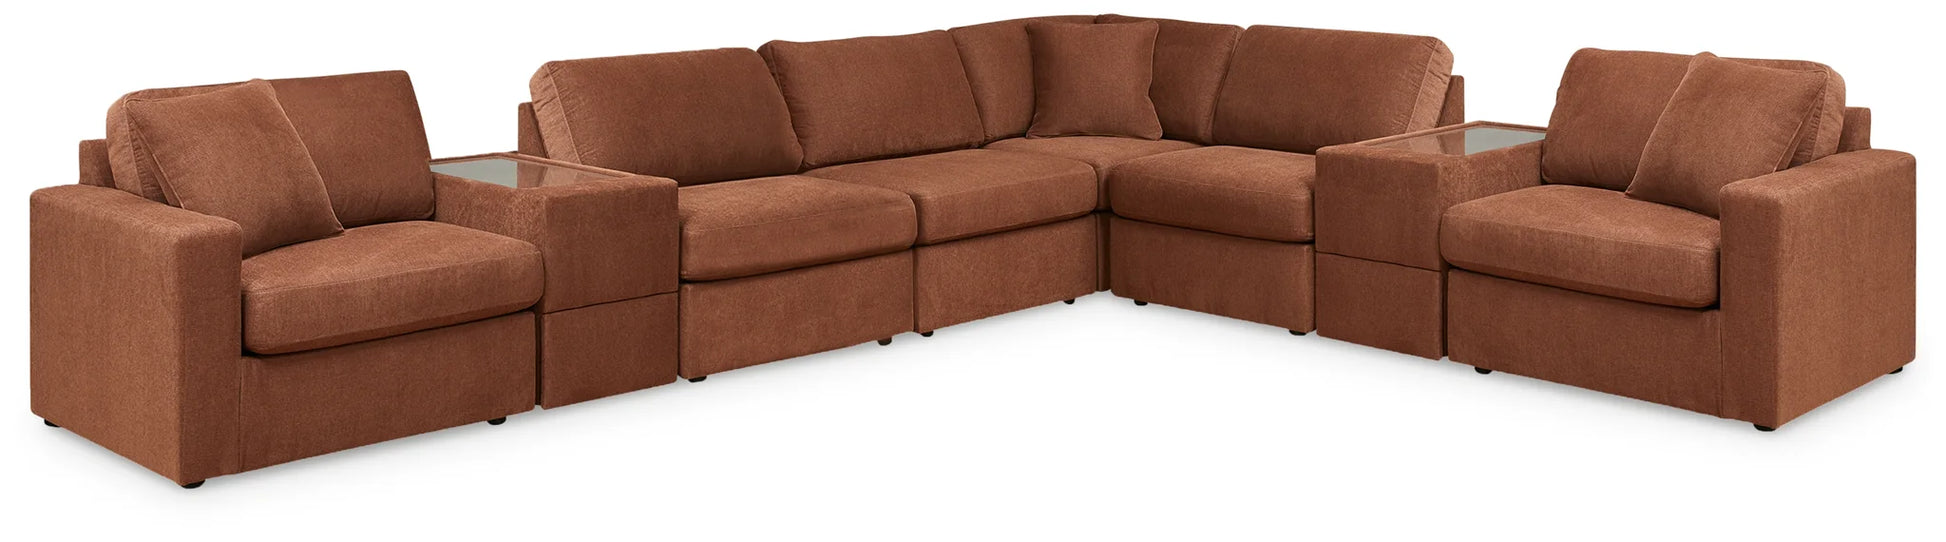 Modmax - Spice - 8-Piece Sectional With 2 Storage Consoles